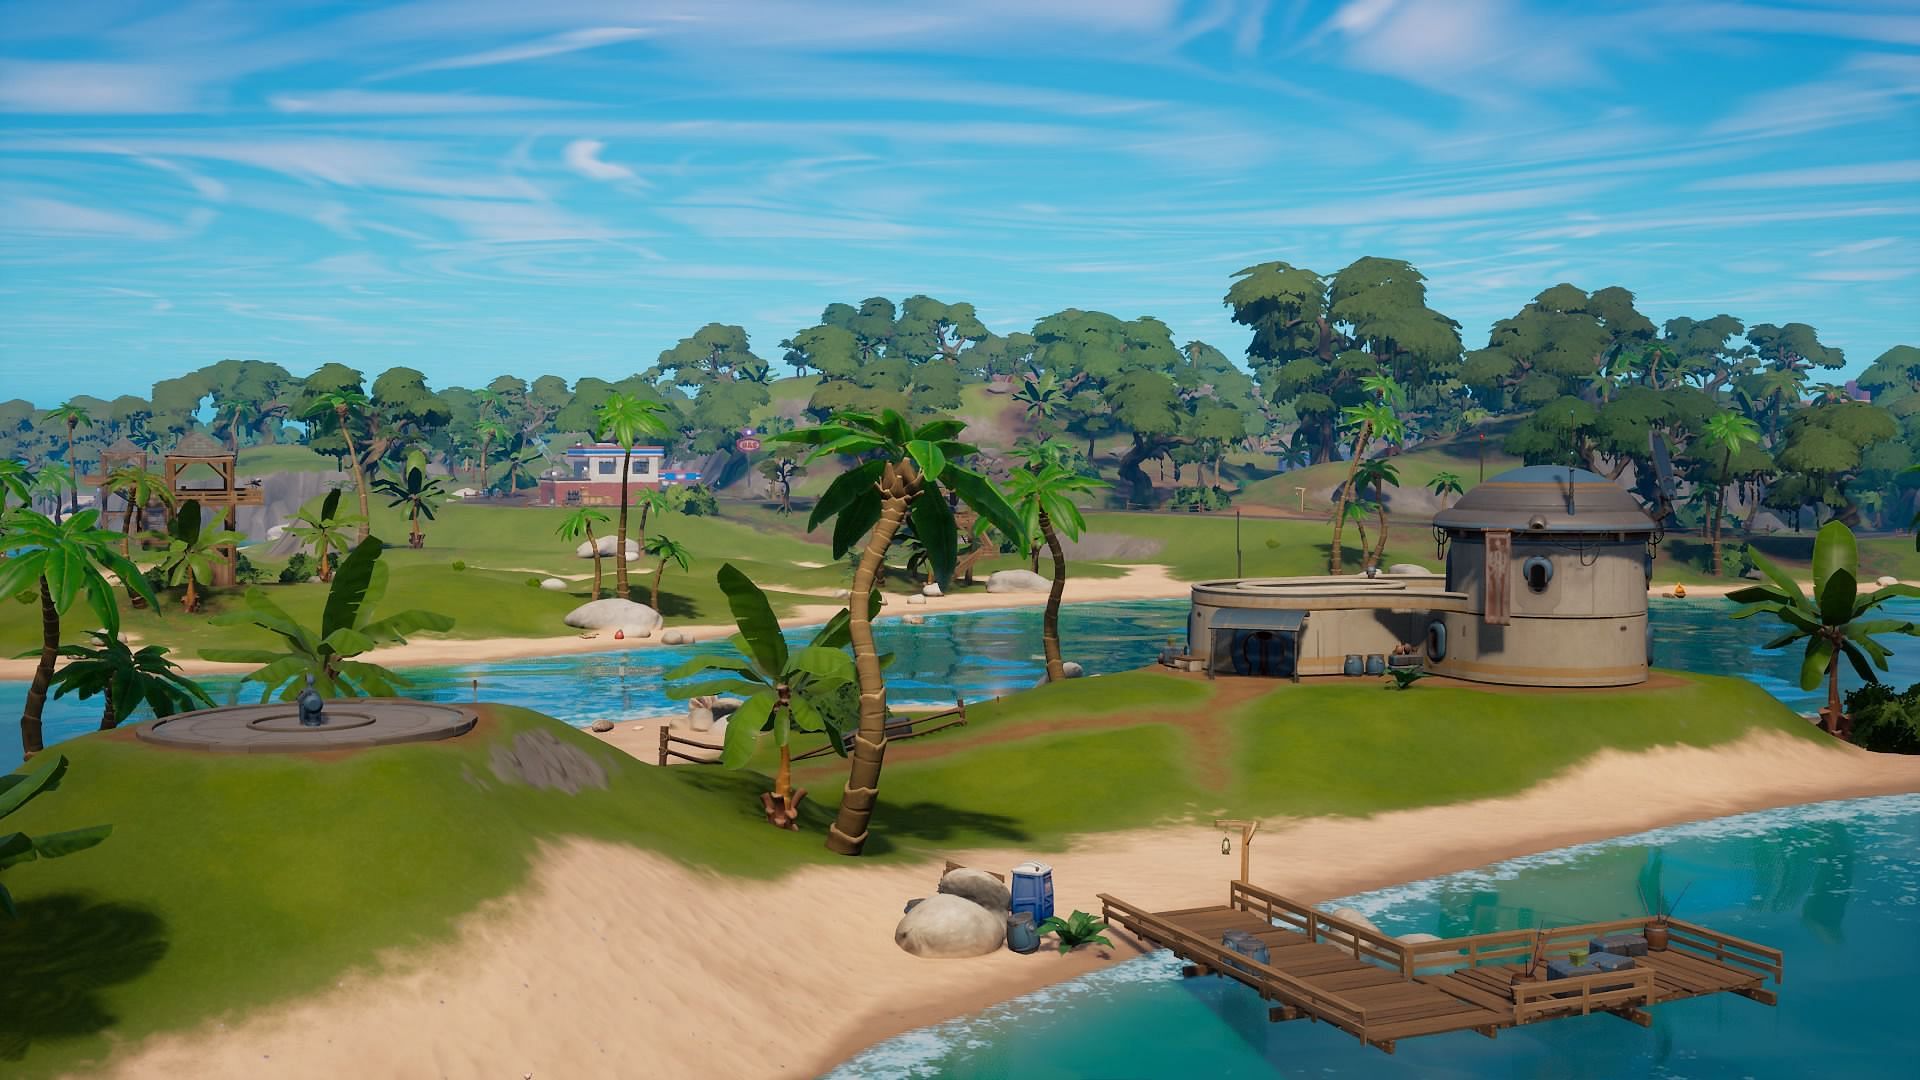 A Seven Outpost near the other landmarks (Image via Epic Games)